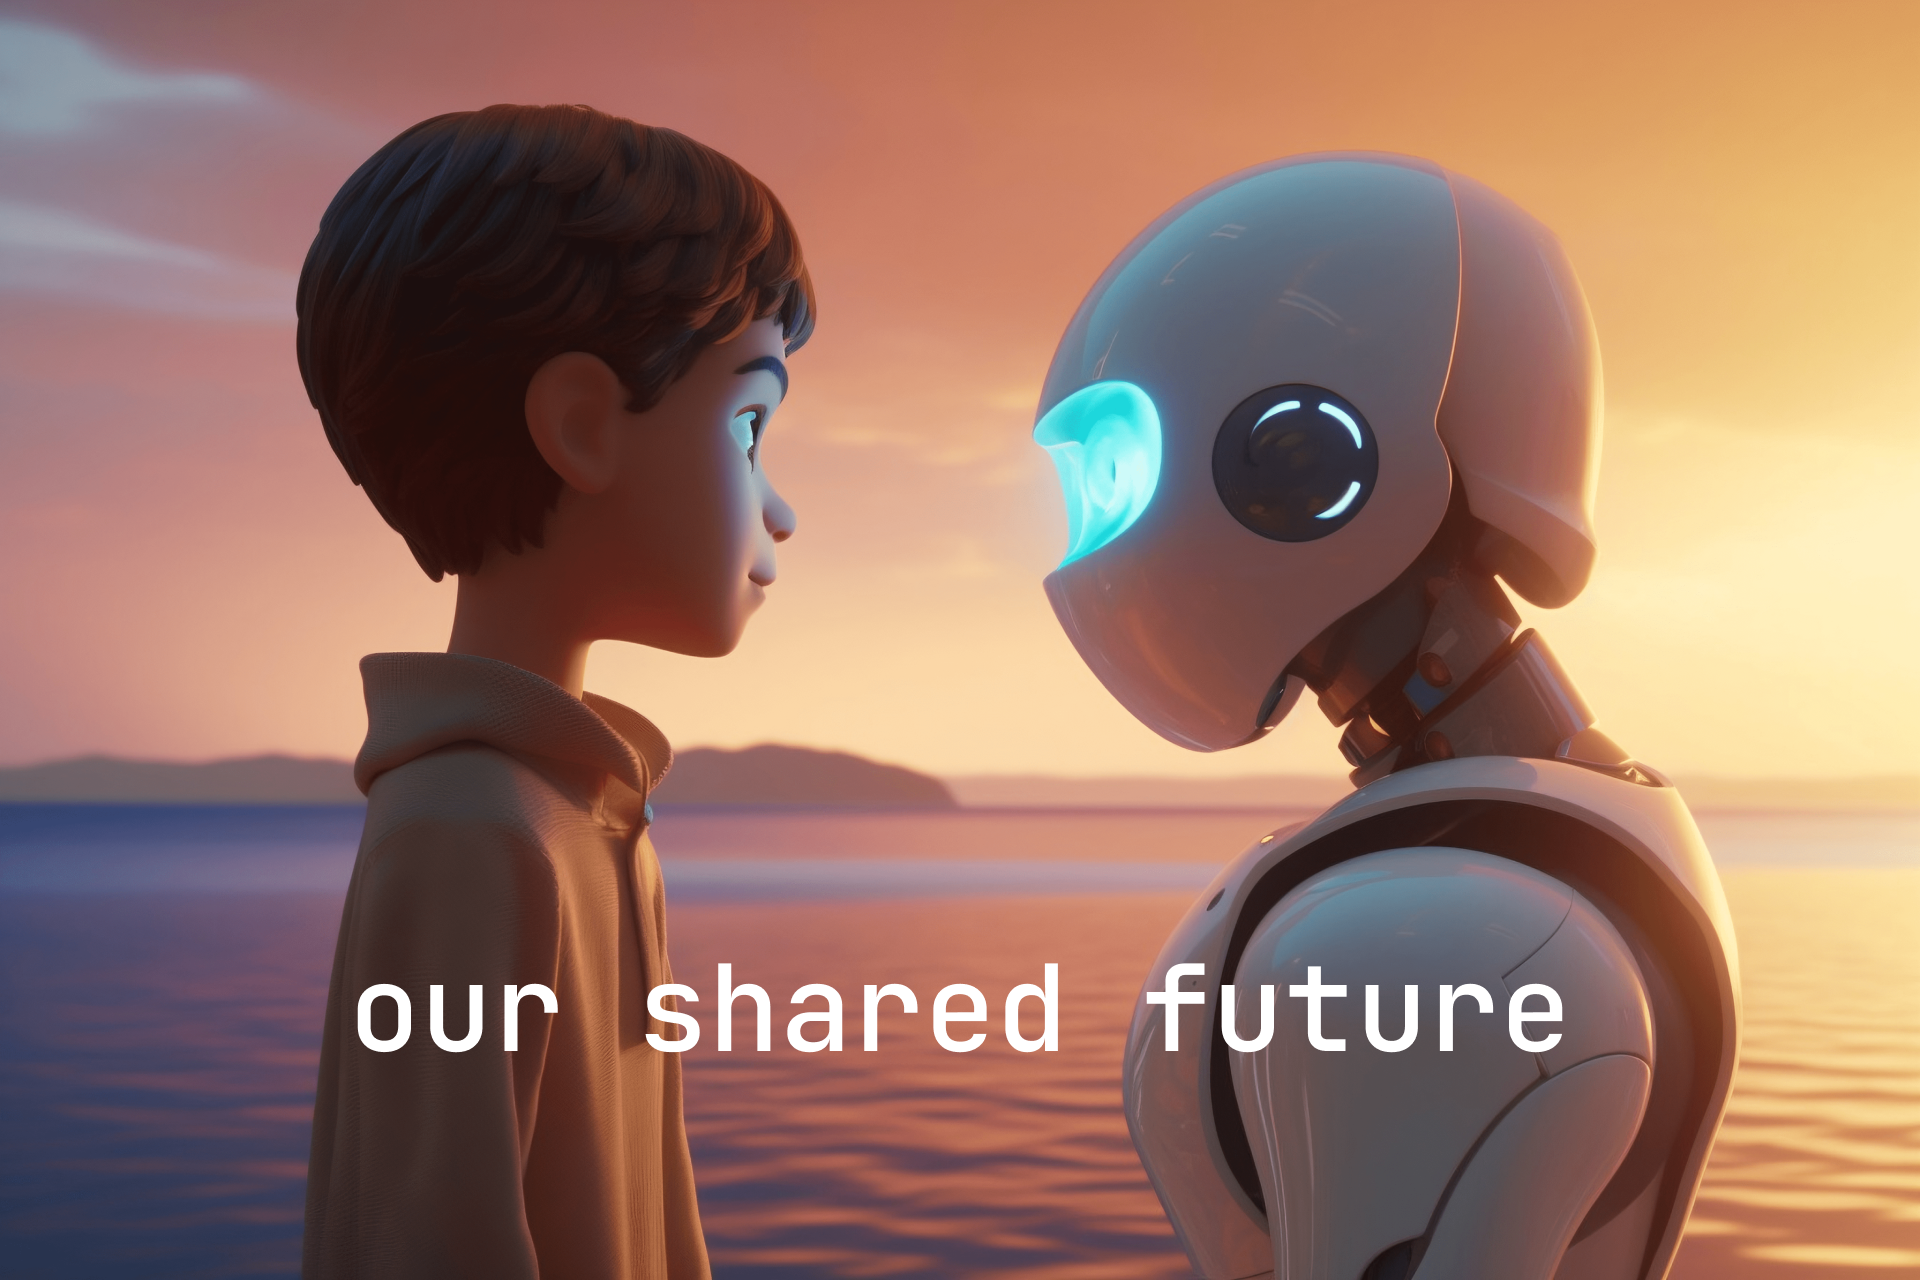 Our shared future